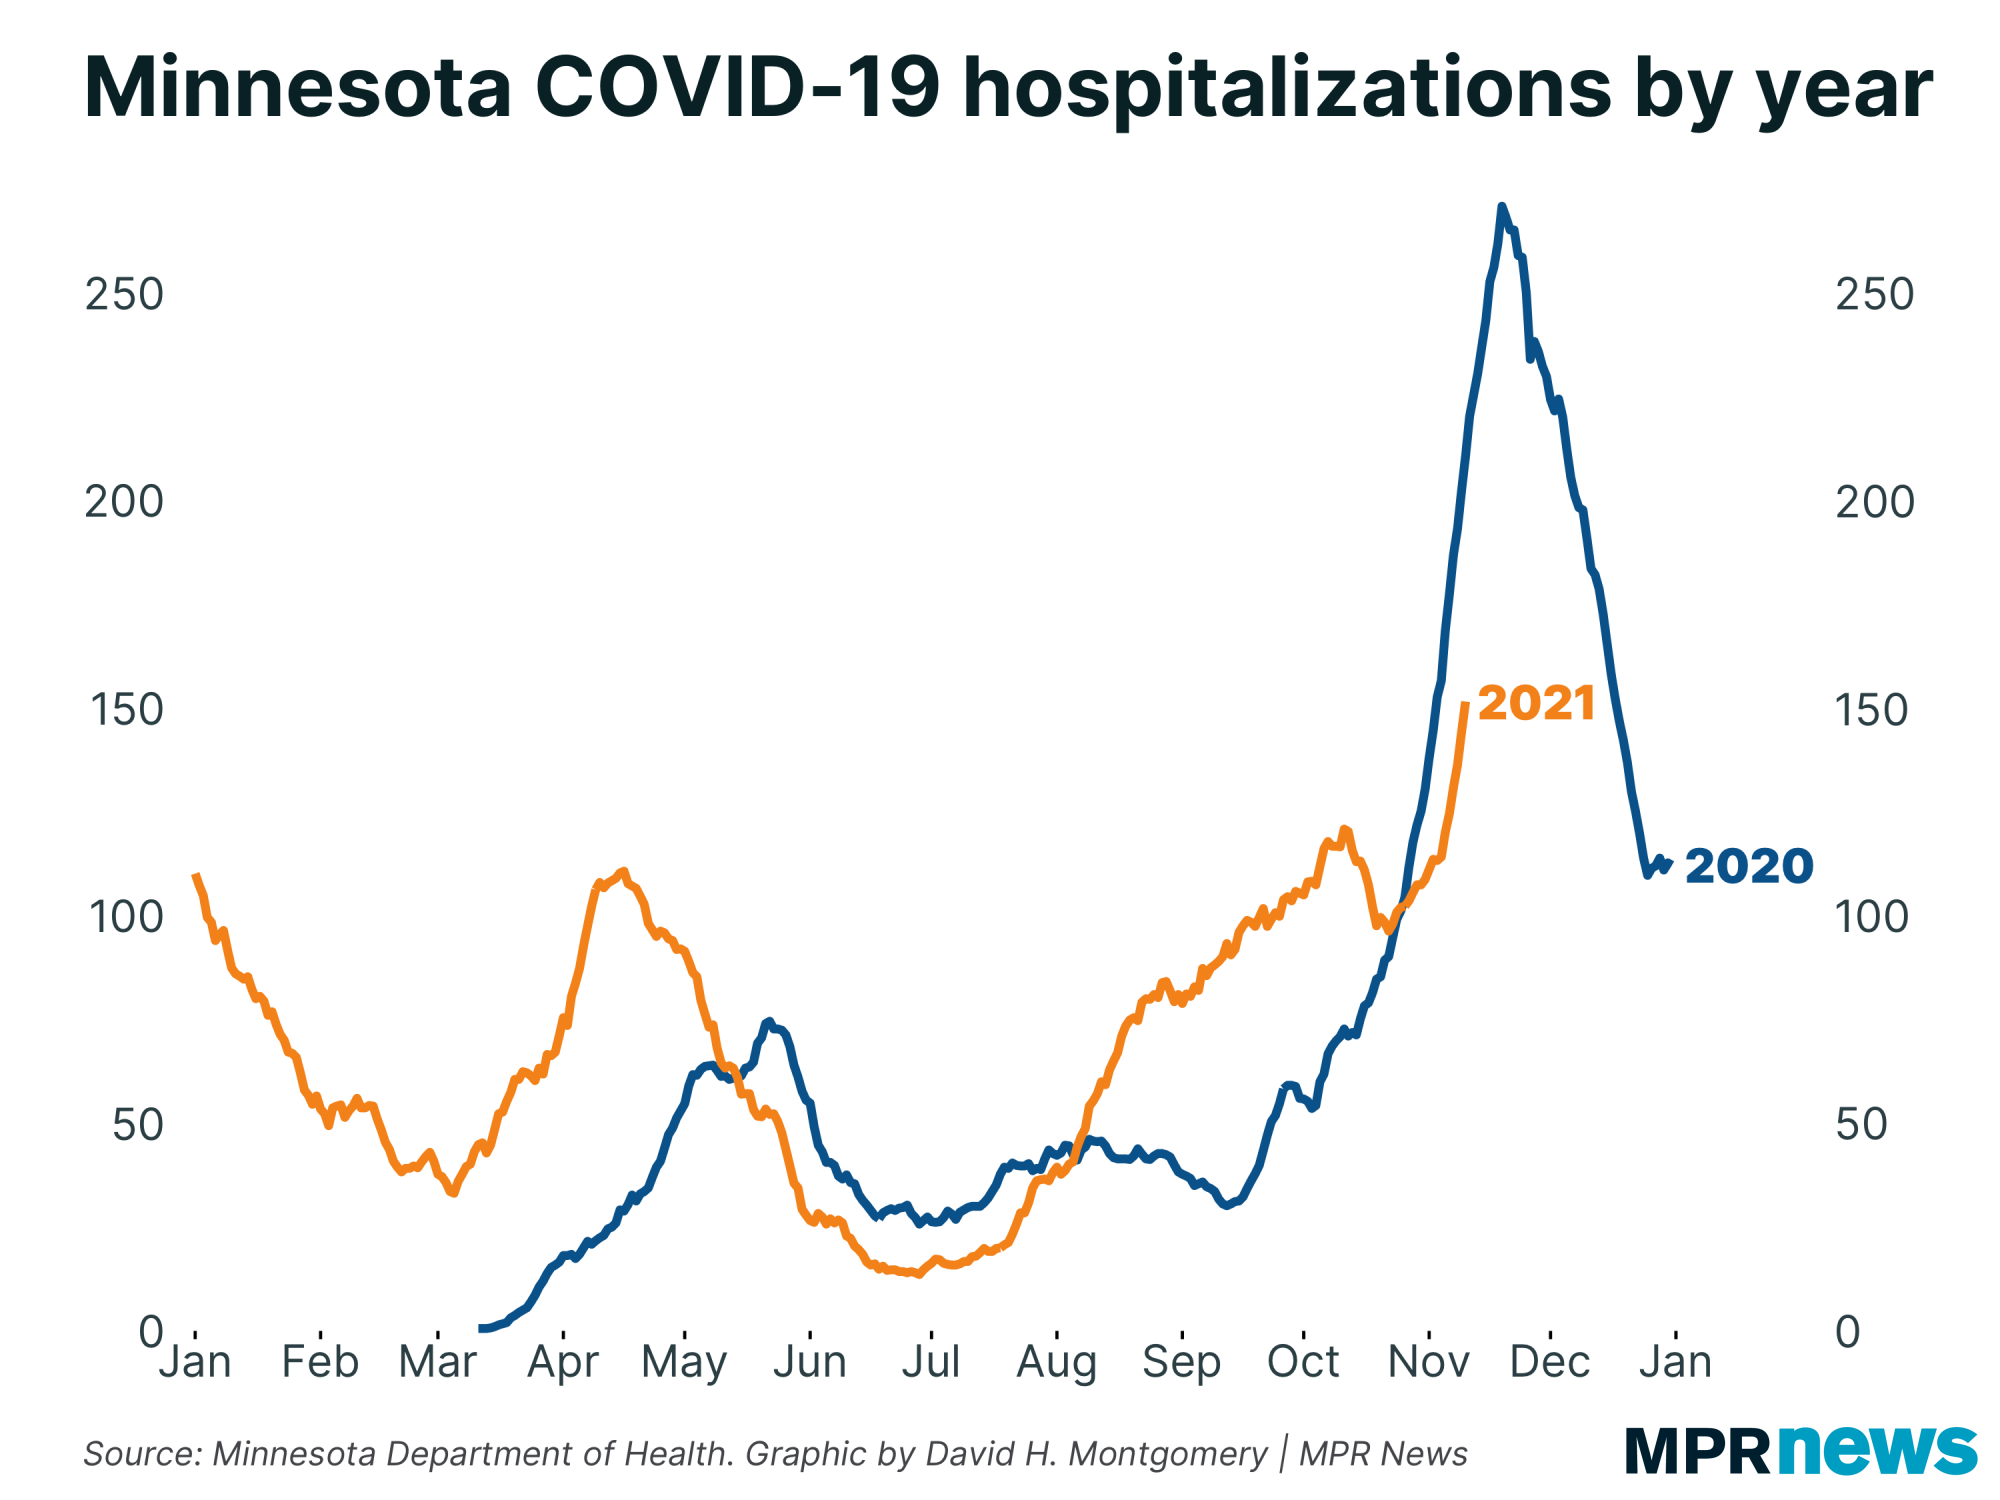 Graph of Minnesota's COVID-19 hospitalizations by year